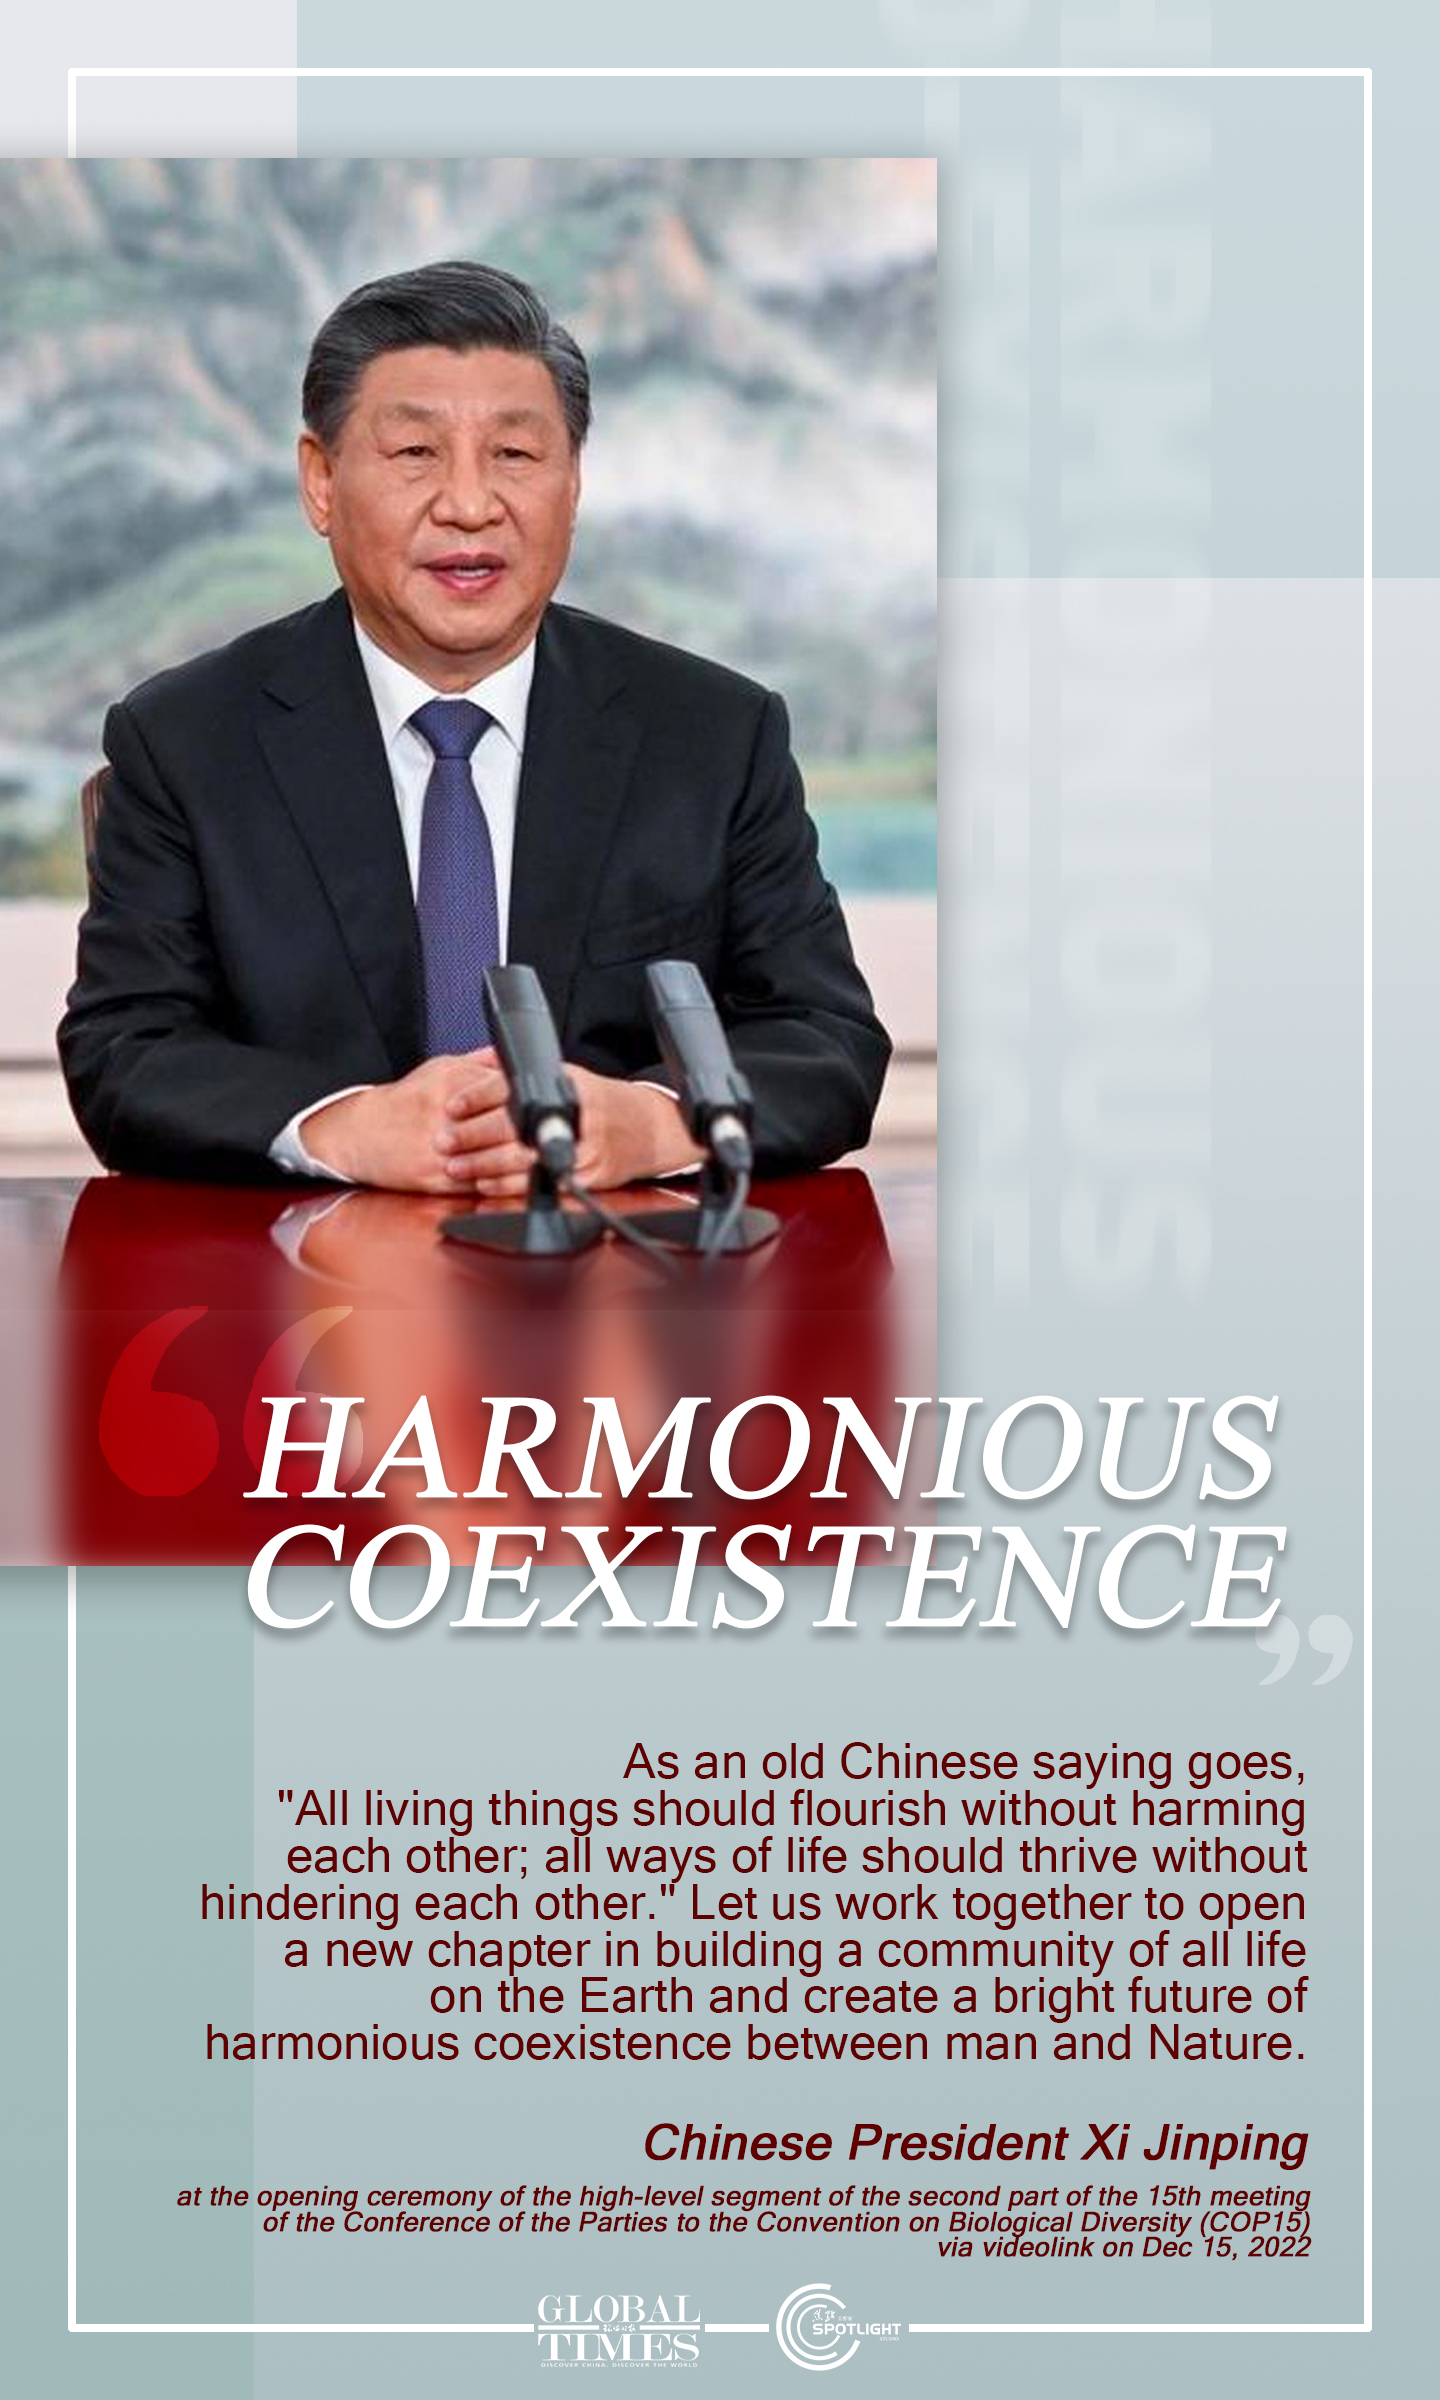 Highlights of President Xi’s 2022 speeches. Graphic:GT